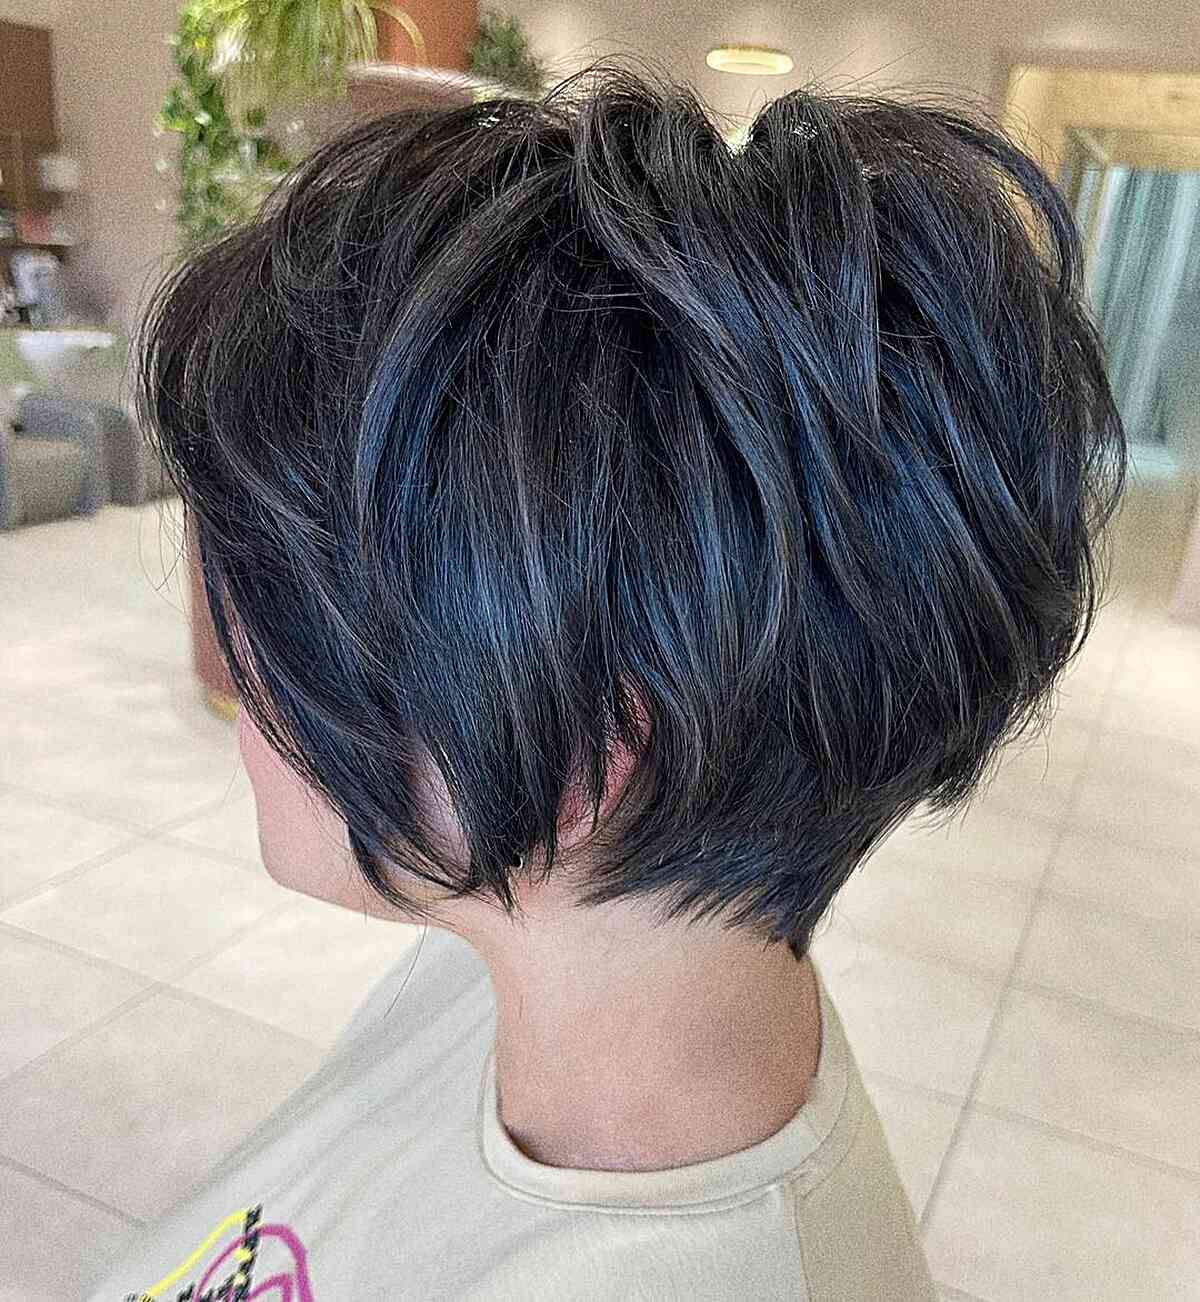 Very Dark Pixie Bob with Visible Layers for women with short hair